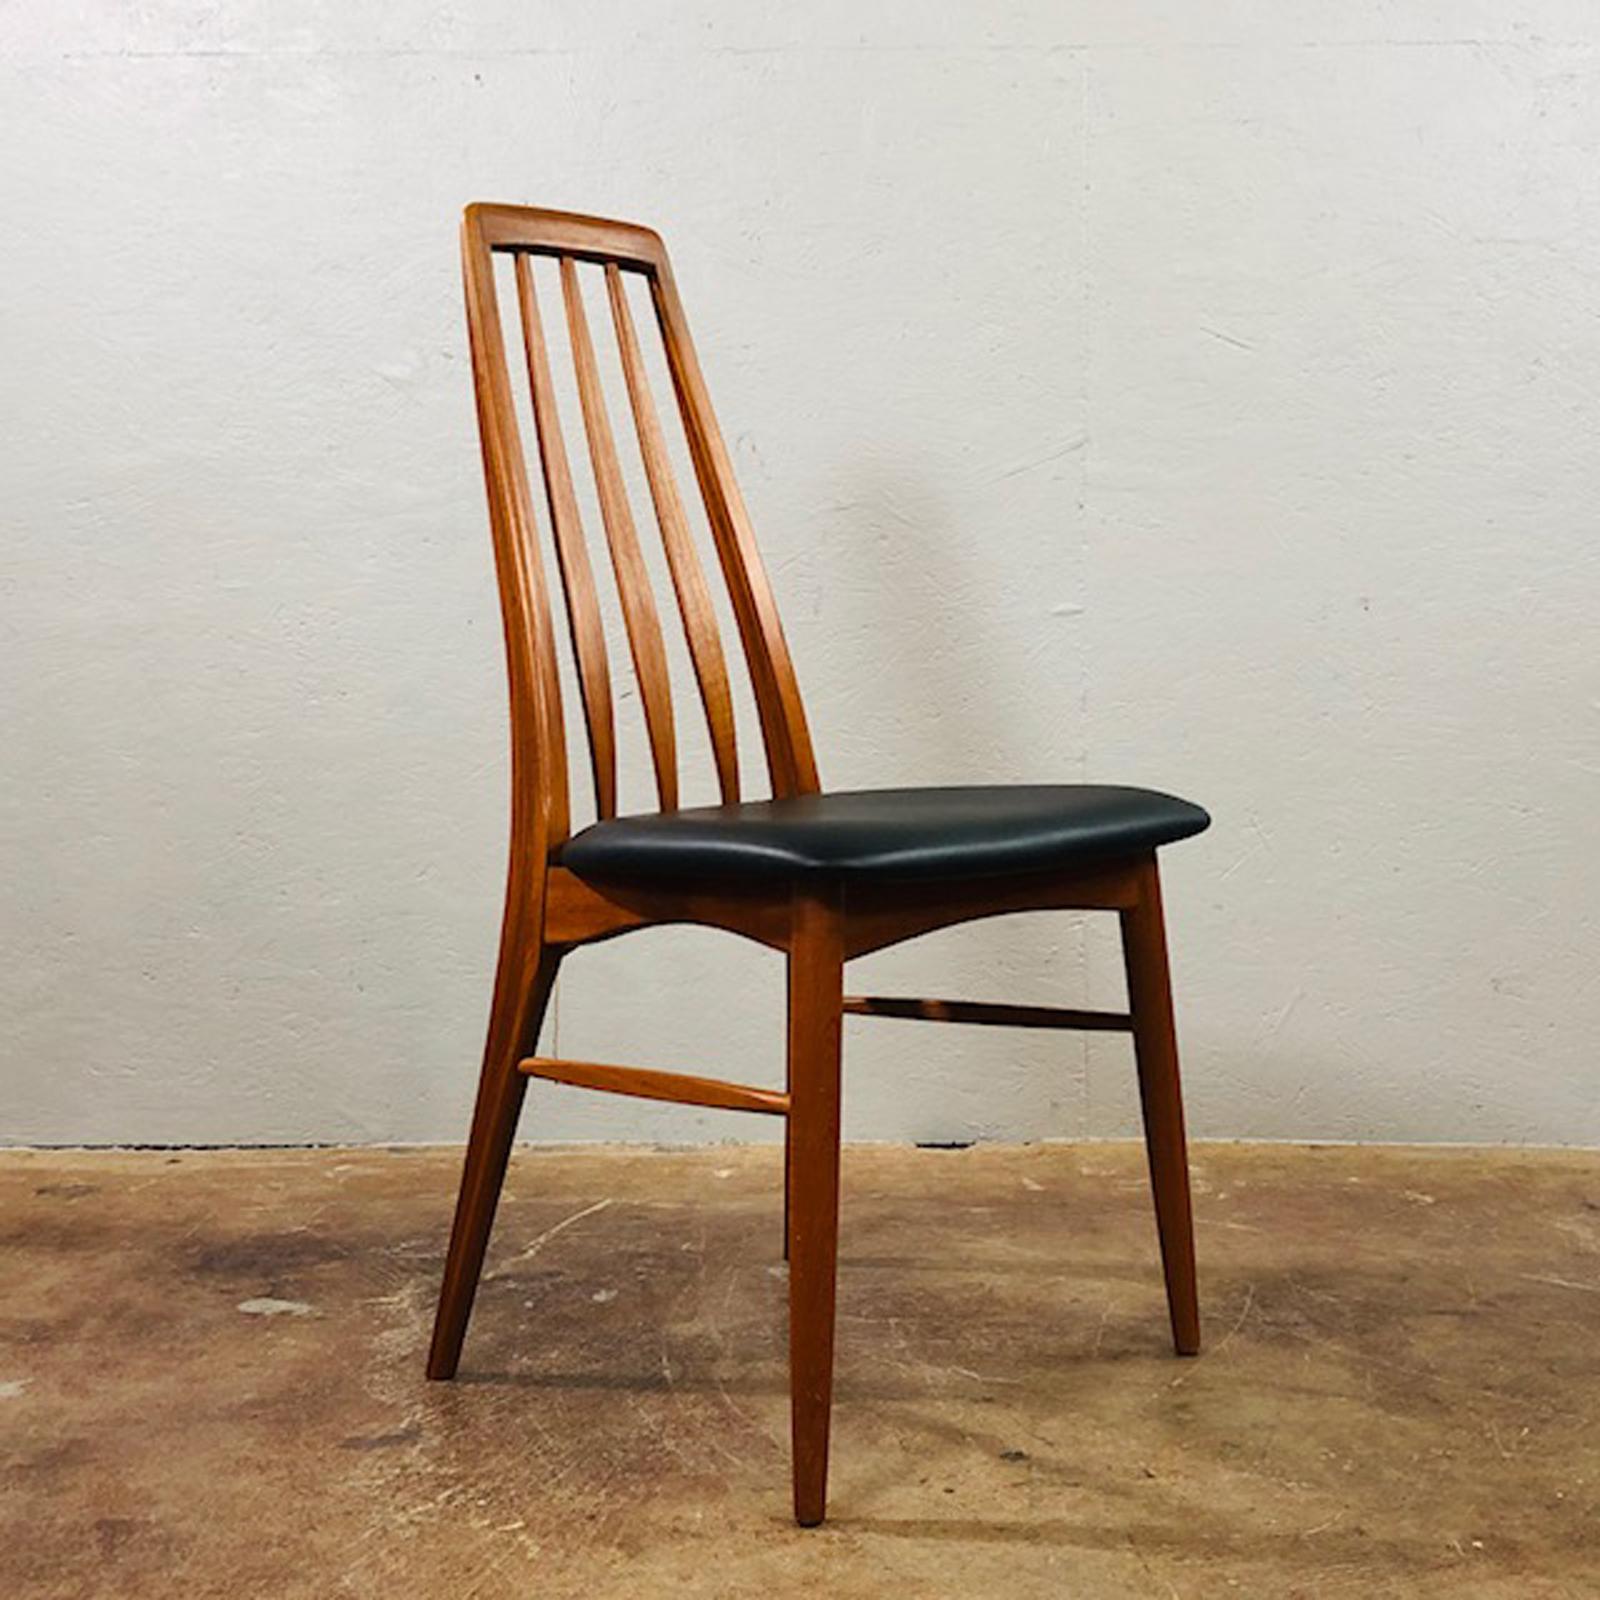 Set of four immaculate teak dining chairs by Niels Koefoed for Koefoed Hornslet, circa 1960s. Leather seats.